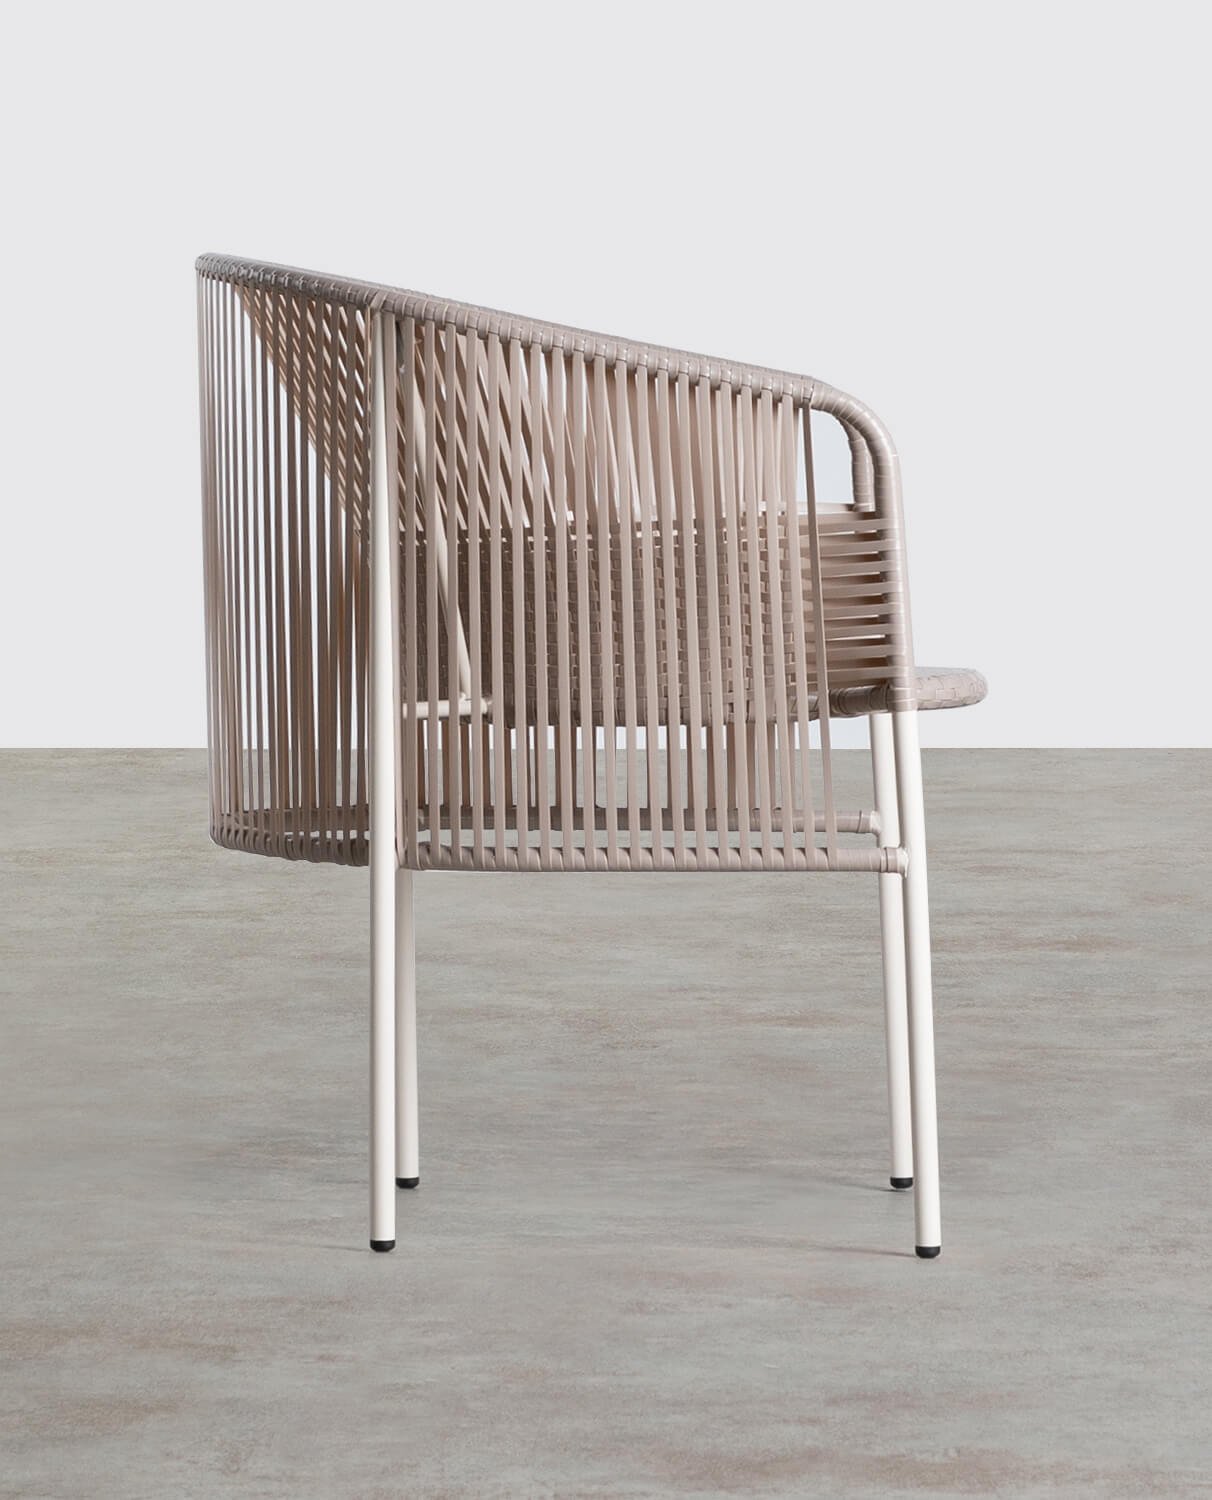 Rattan and Steel Outdoor Chair Orka Trend, gallery image 2